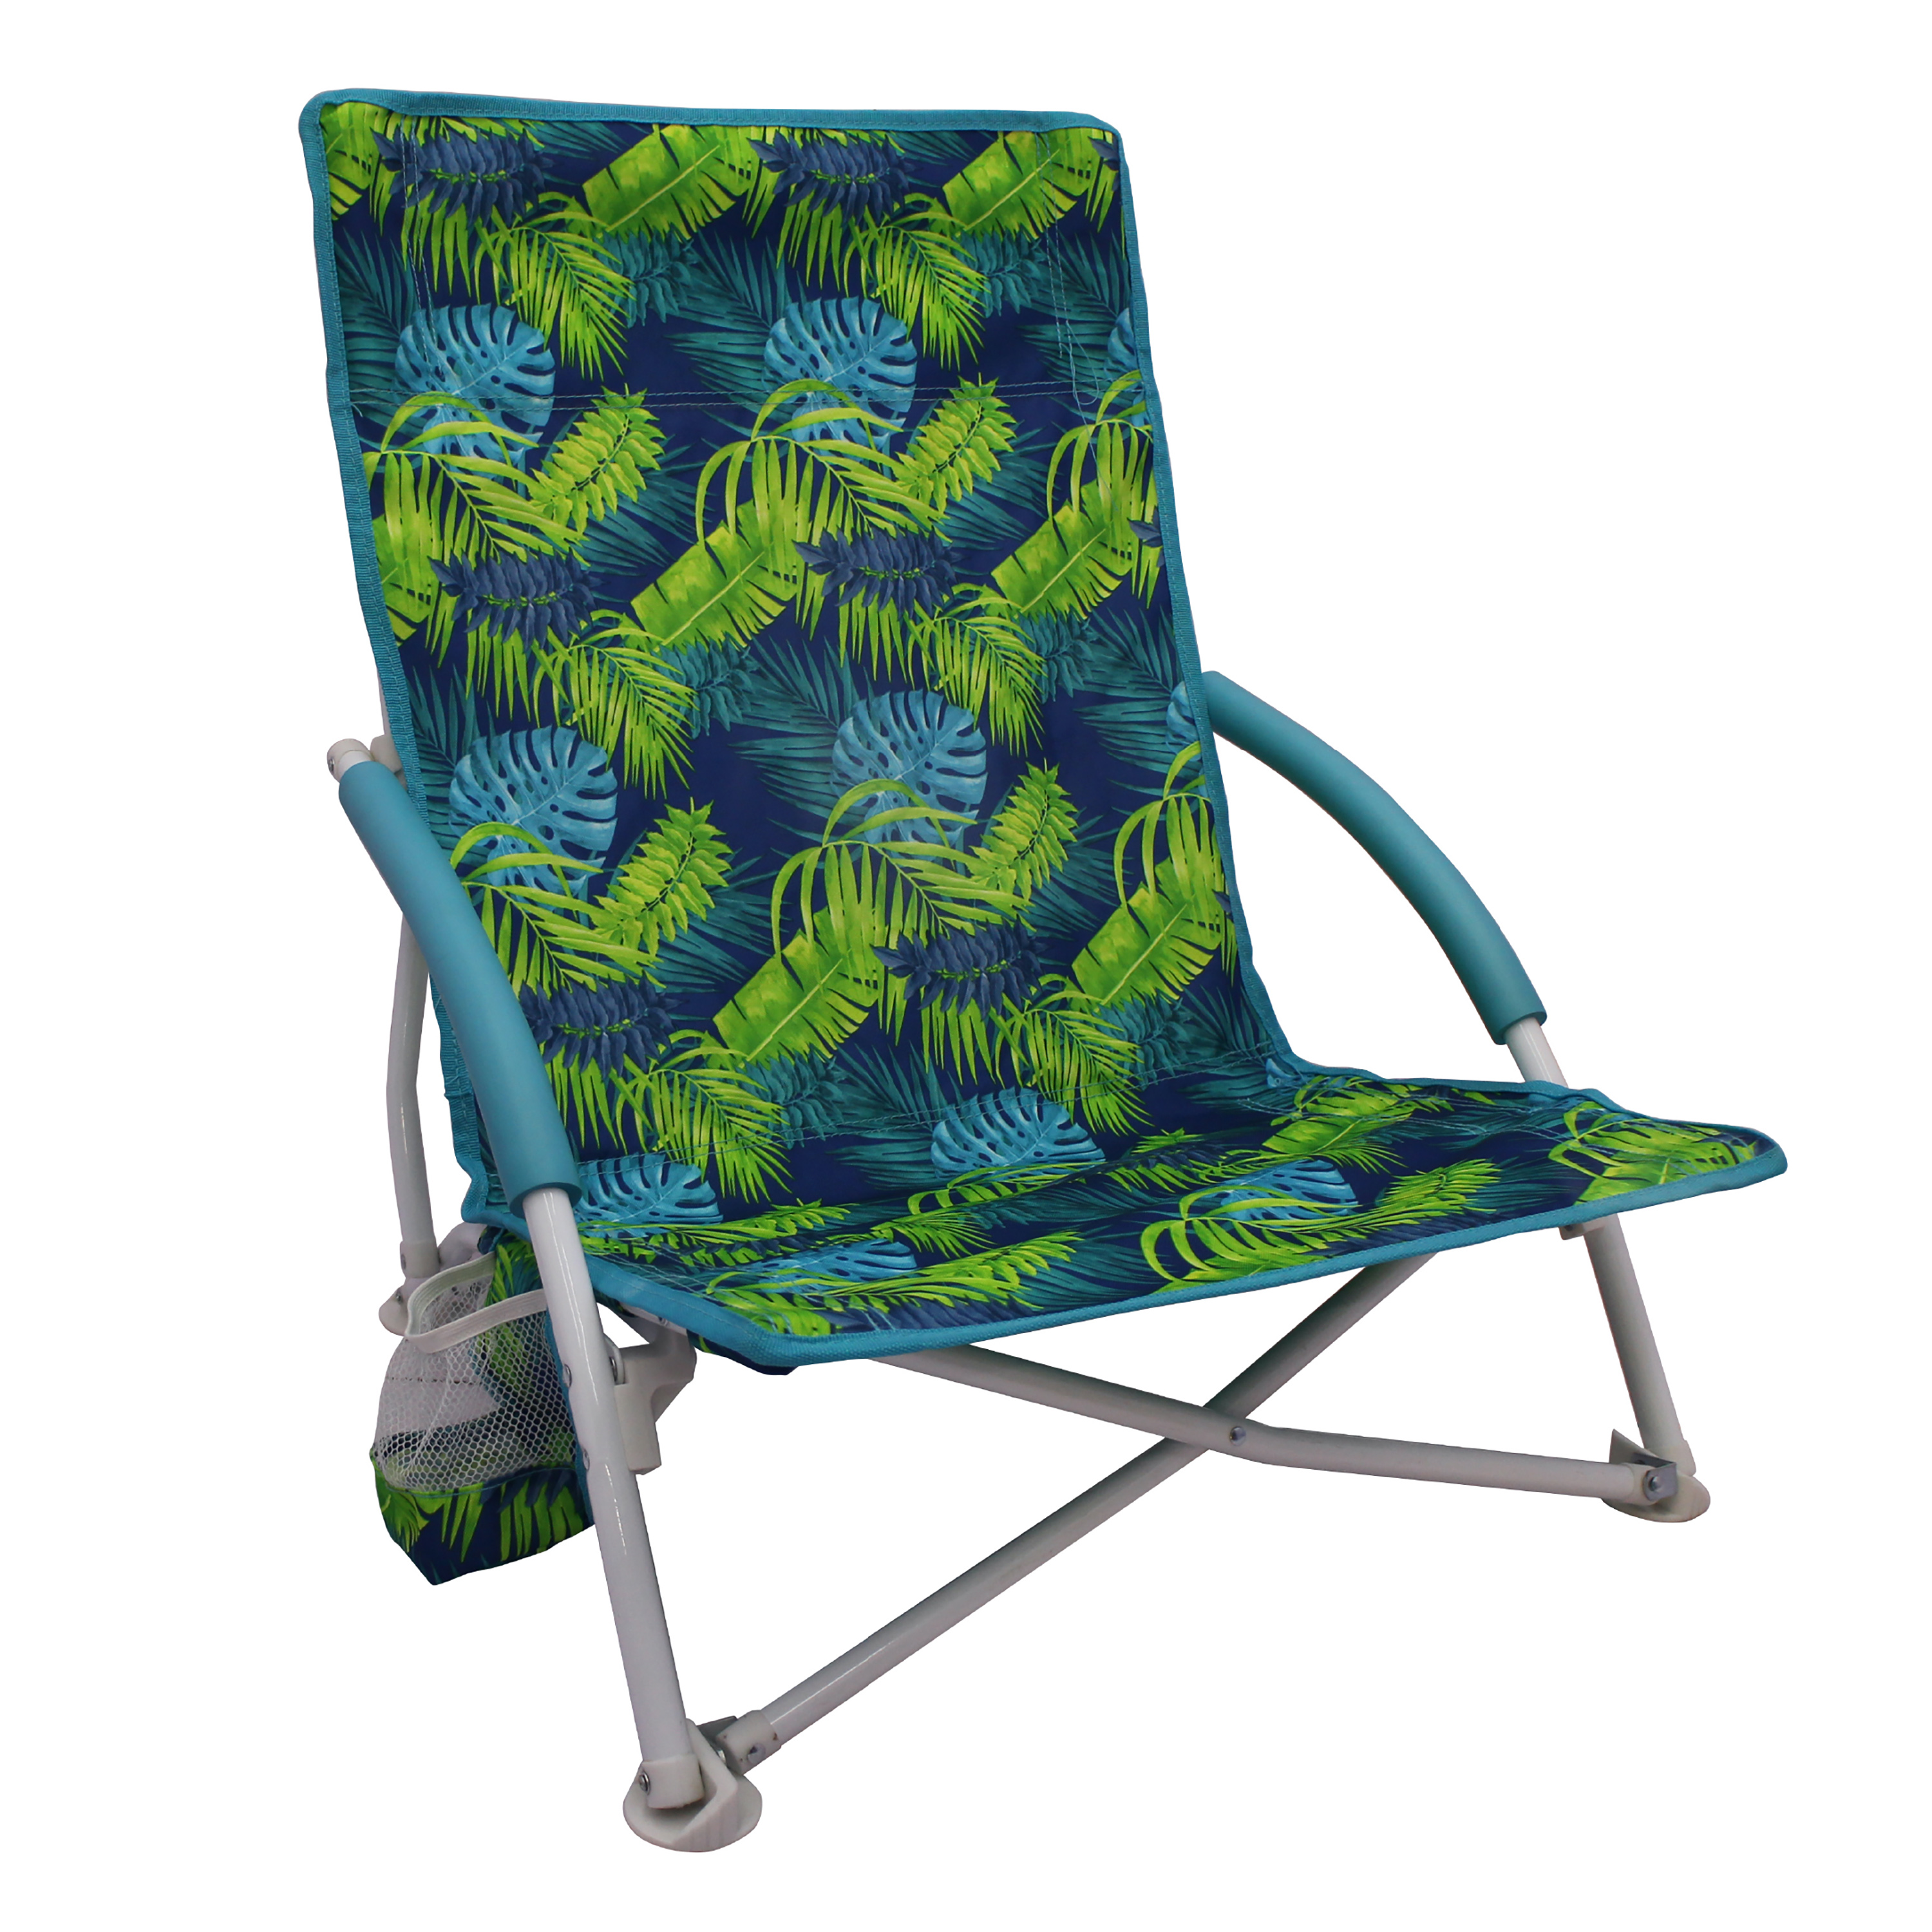 Mainstays Folding Low Seat Soft Arm Beach Bag Chair with Carry Bag, Green Palm - image 1 of 9